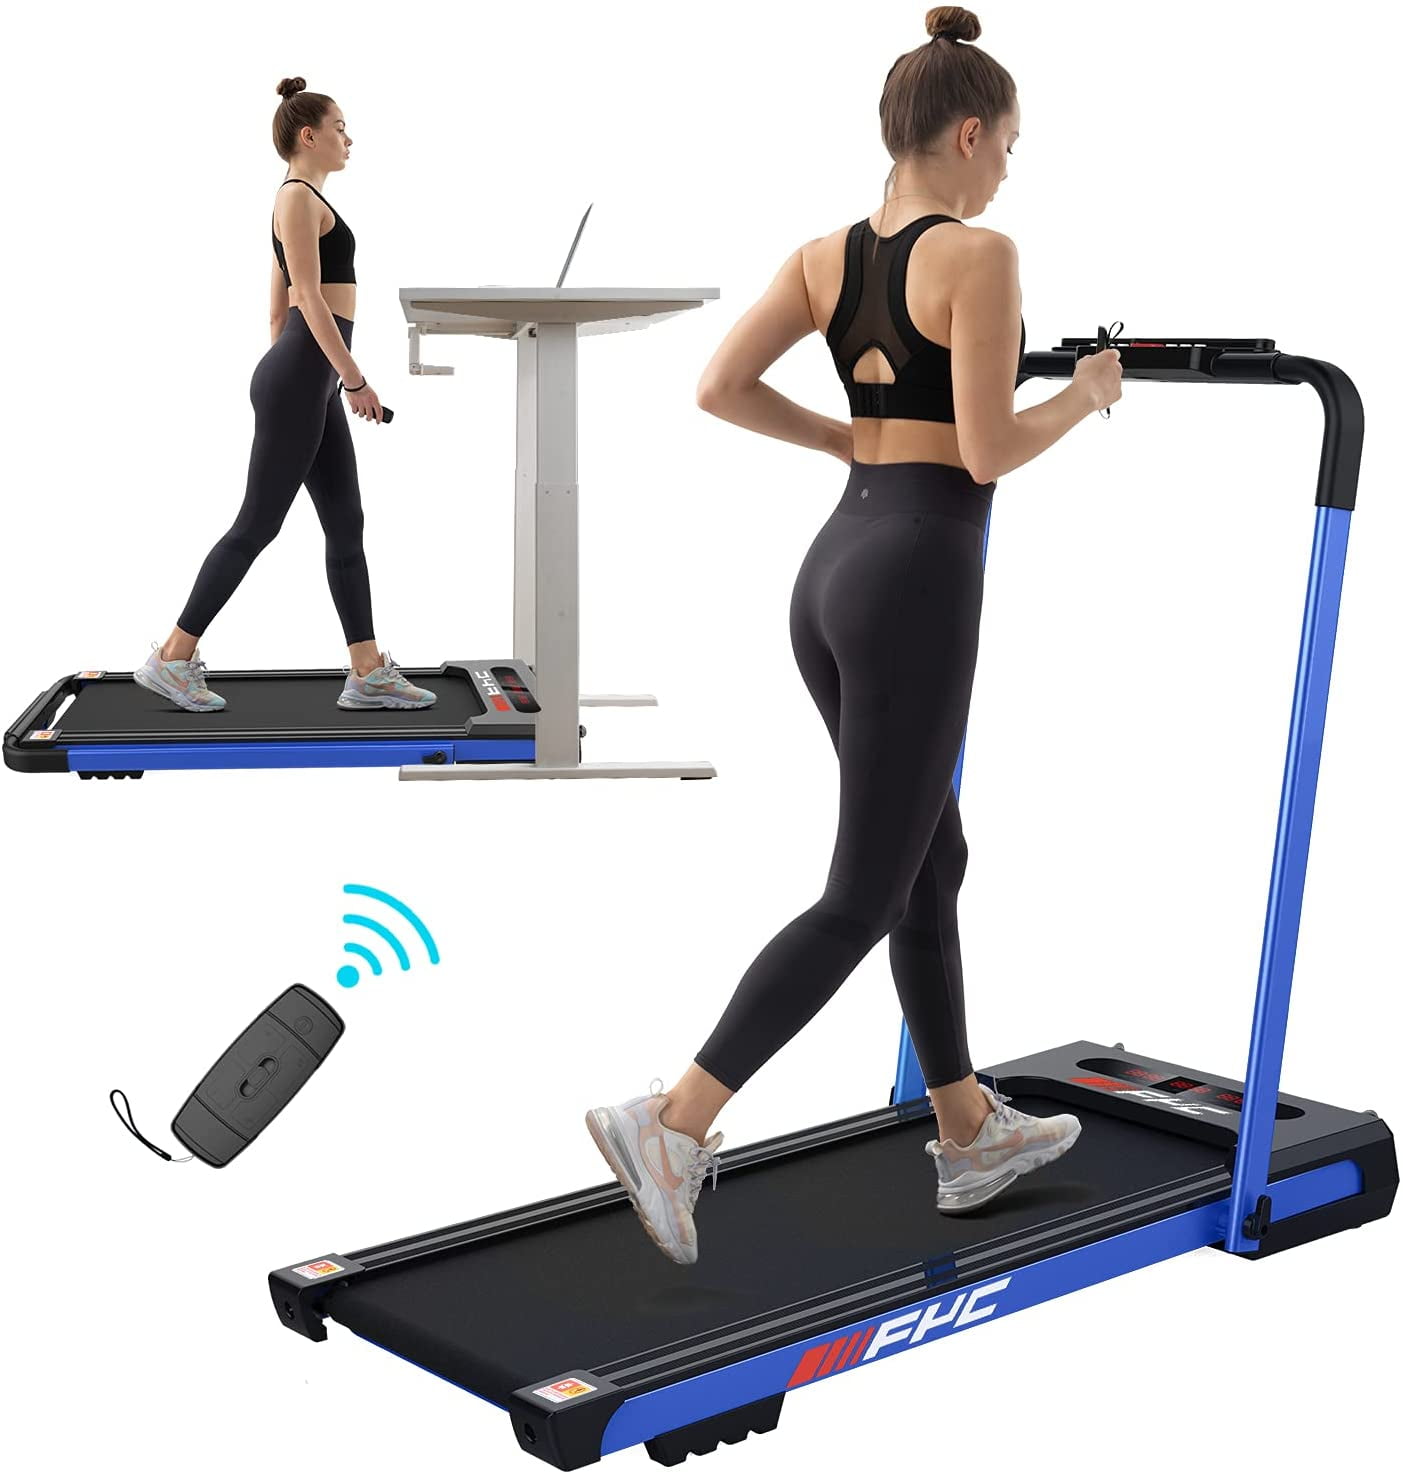 2 in 1 Folding Treadmill for Home 2.5 HP Installation-Free Foldable Treadmill Compact Electric Running Machine FYC Under Desk Treadmill Remote Control and LED Display Walking Running Jogging for Office Home Use 